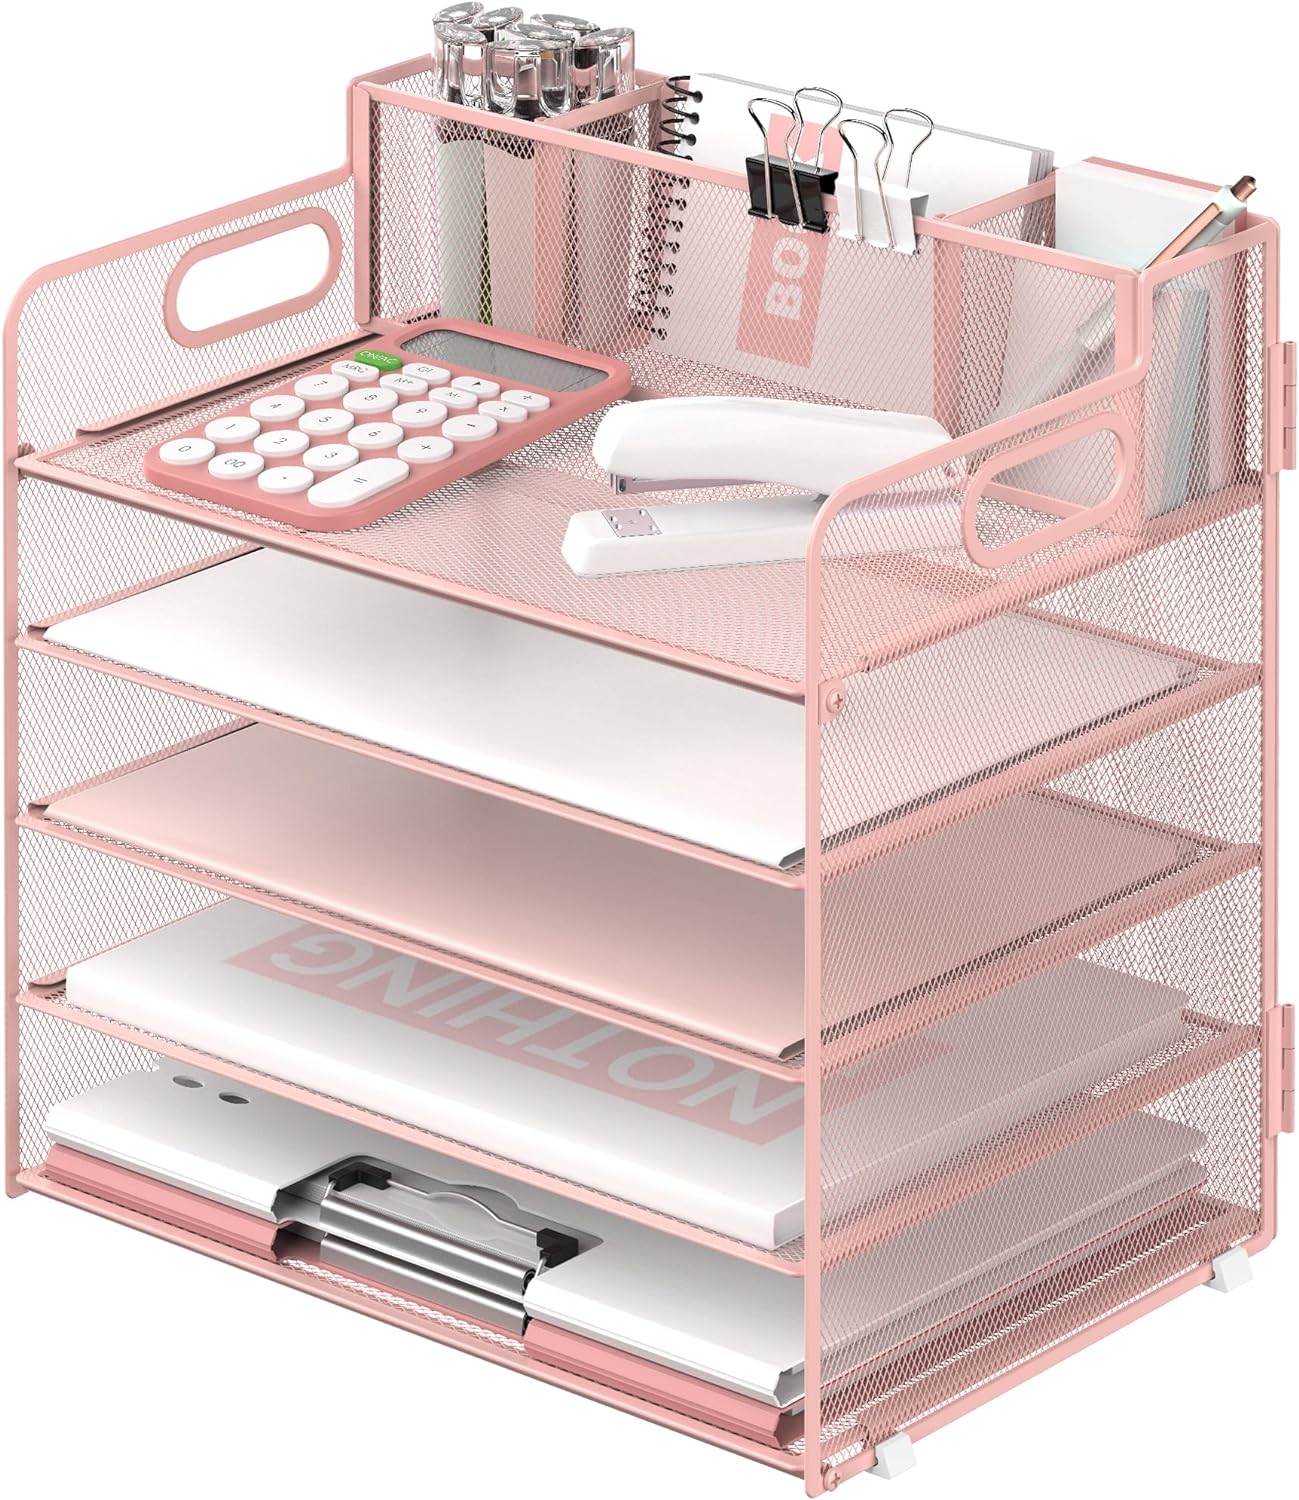 5 Trays Paper Organizer with 3 Pen Holders-Letter Tray Desk Organizer, Mesh Desk File Organizer with Handle, Paper Sorter for Office Organization (Pink)